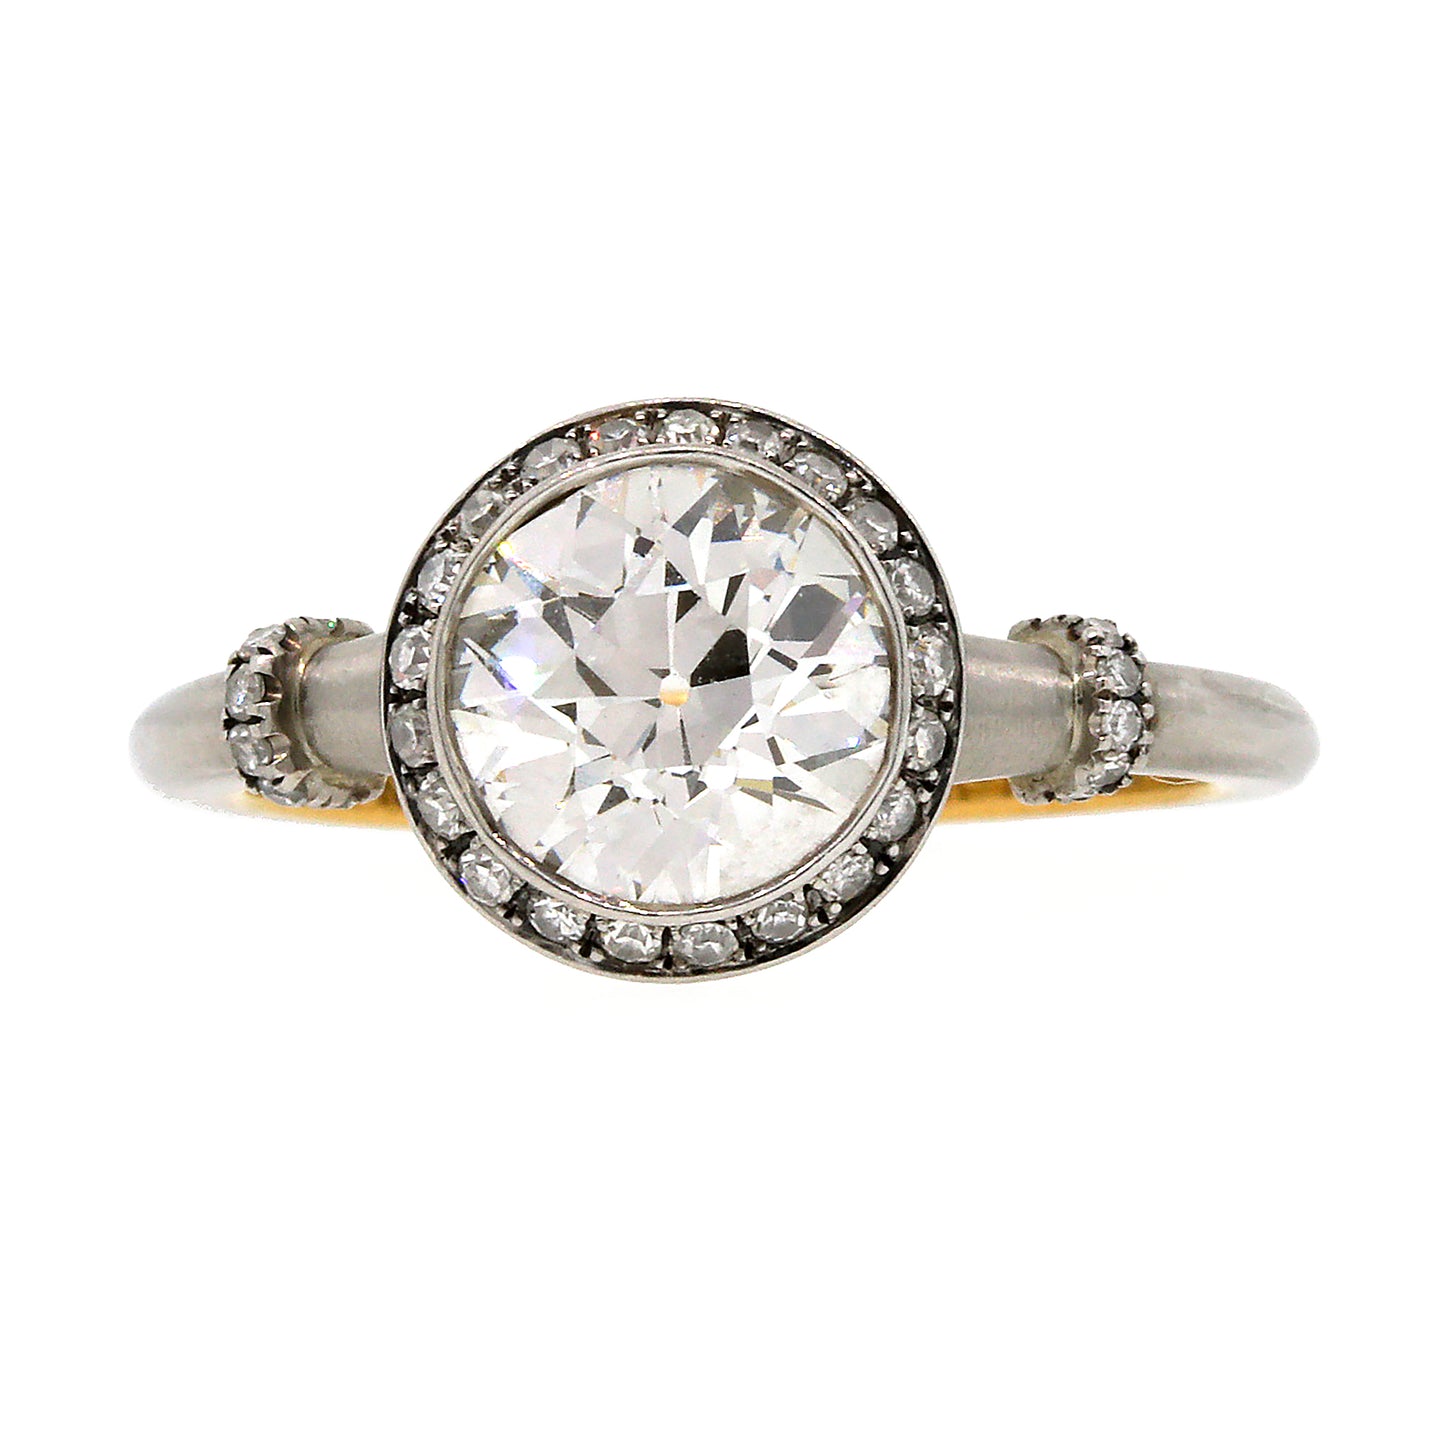 Load image into Gallery viewer, GIA Certified Old European Cut Diamond Engagement Ring Size 6.75
